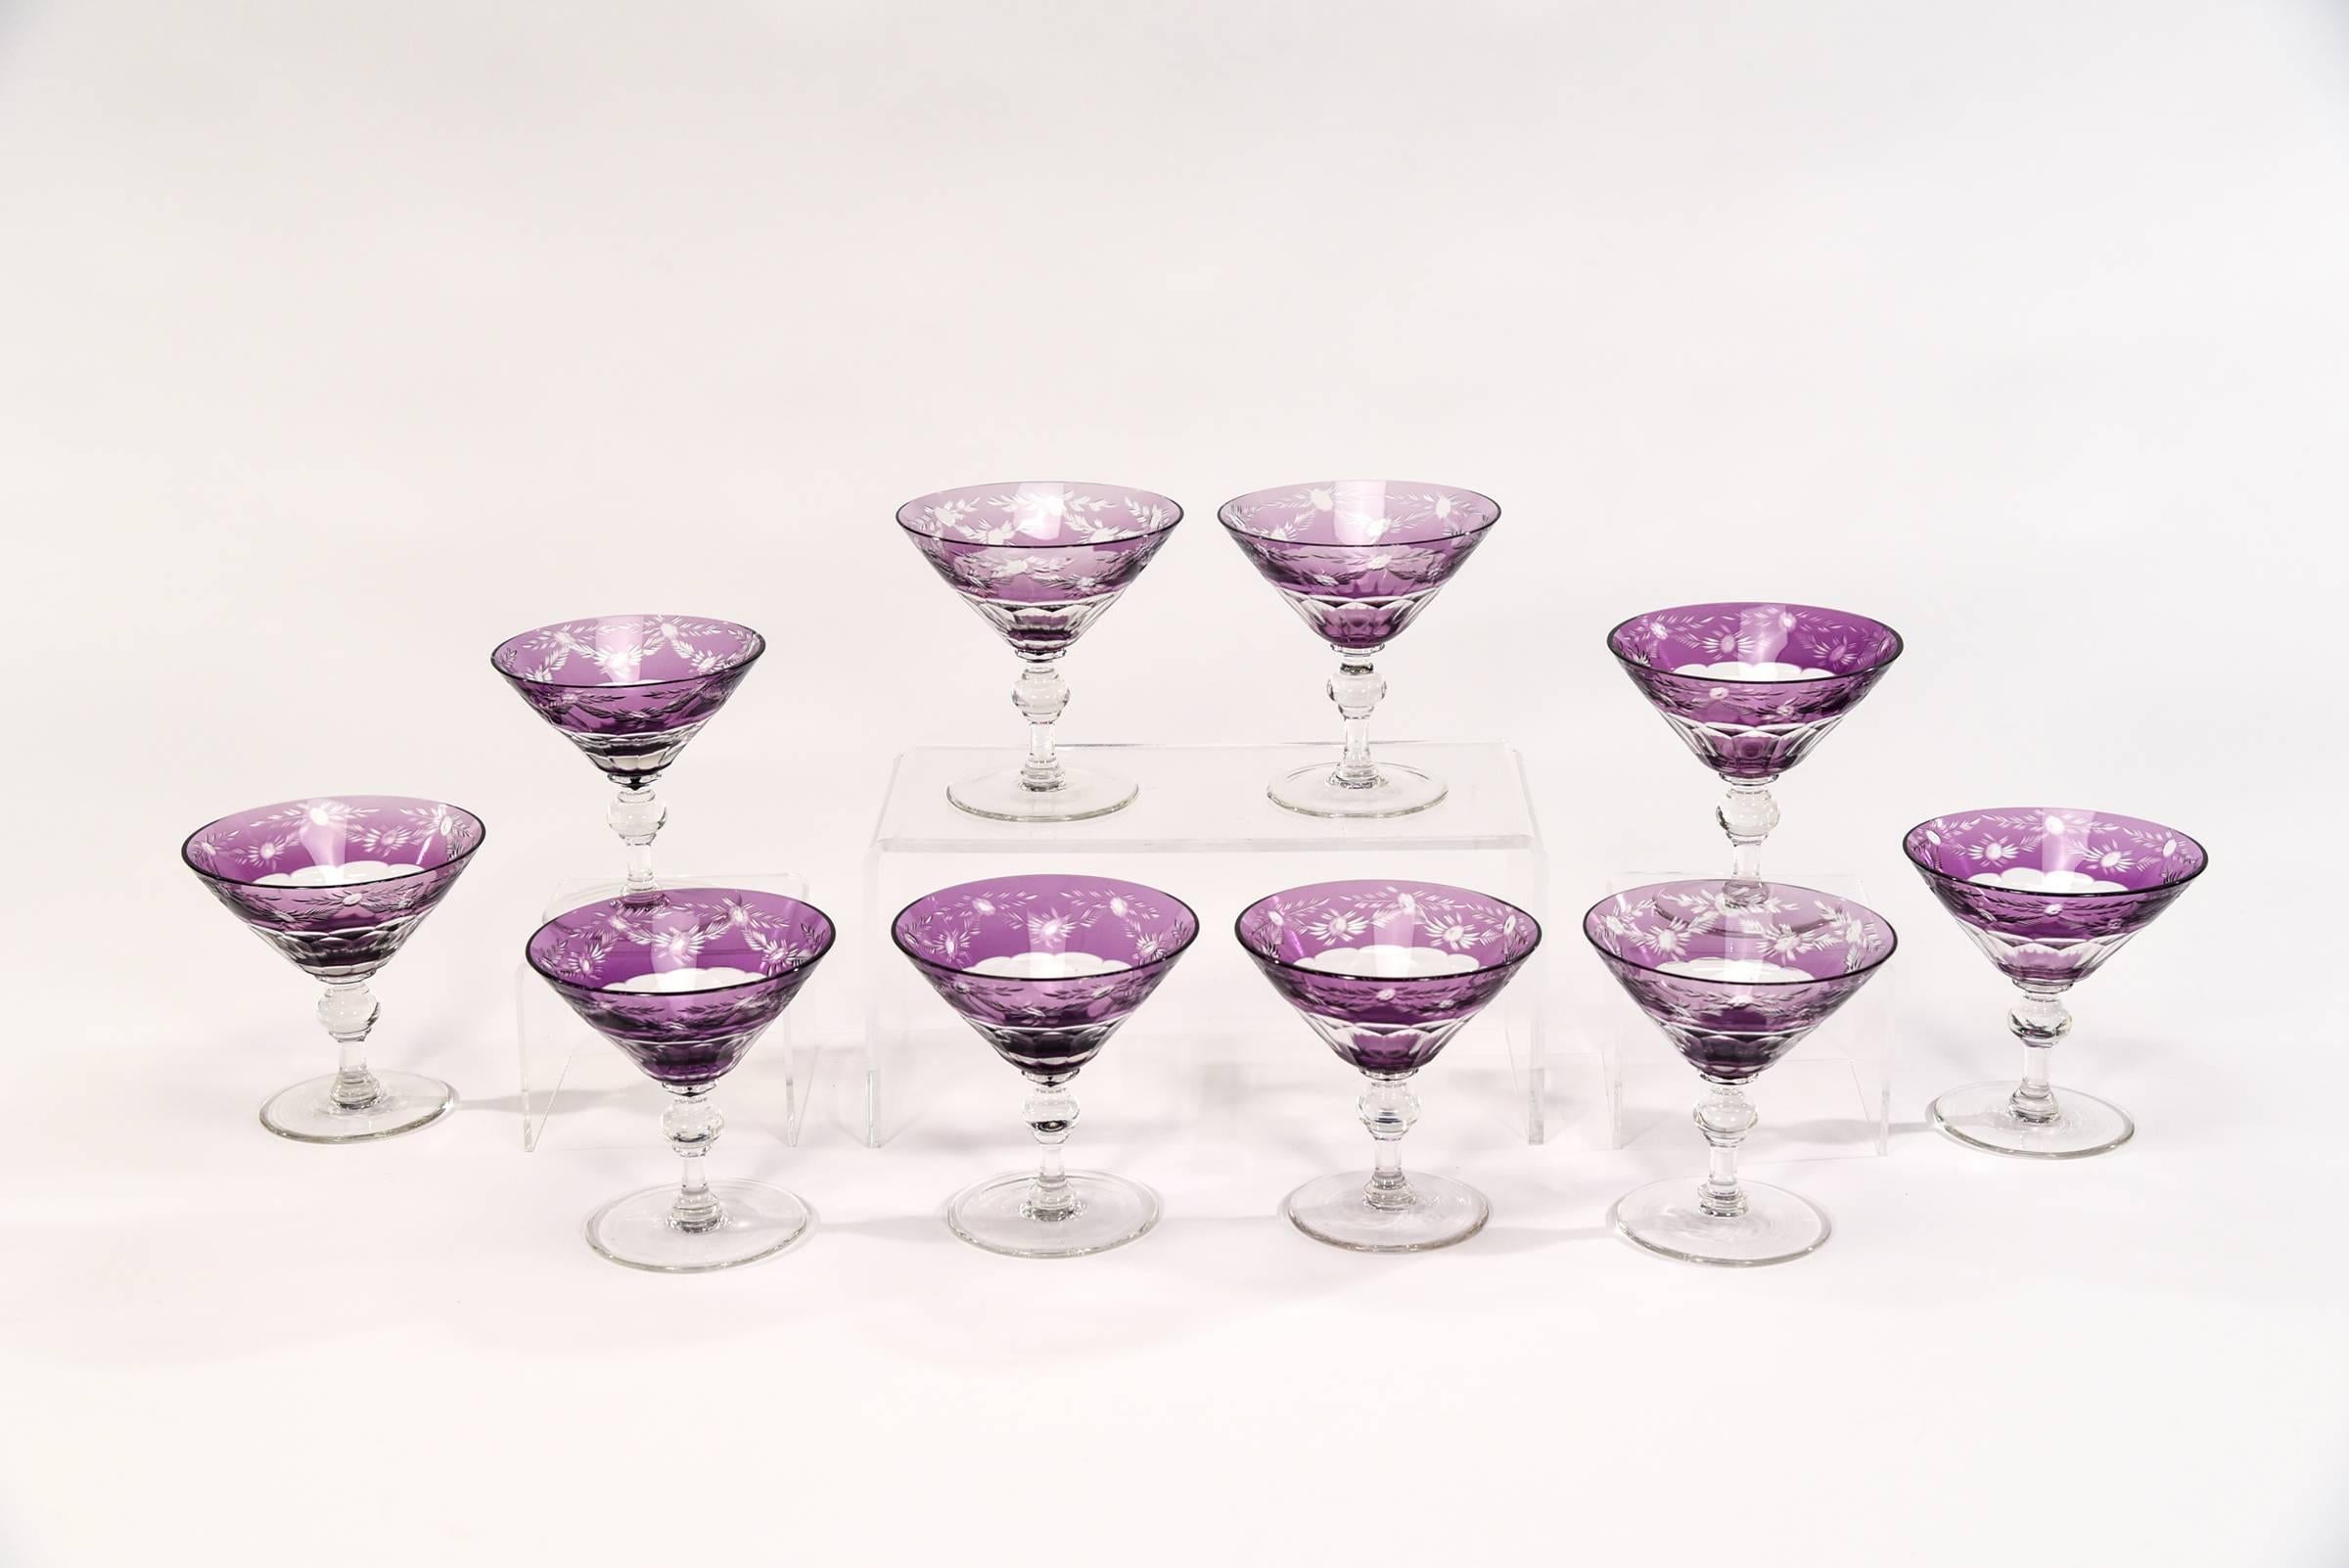 Ready for a pop of color, this rare set of ten handblown goblets are perfect for your favorite drink or even can be used as dessert coupes. The rich amethyst overlay border is cut to clear in an elegant floral pattern over the panel cut bowl and